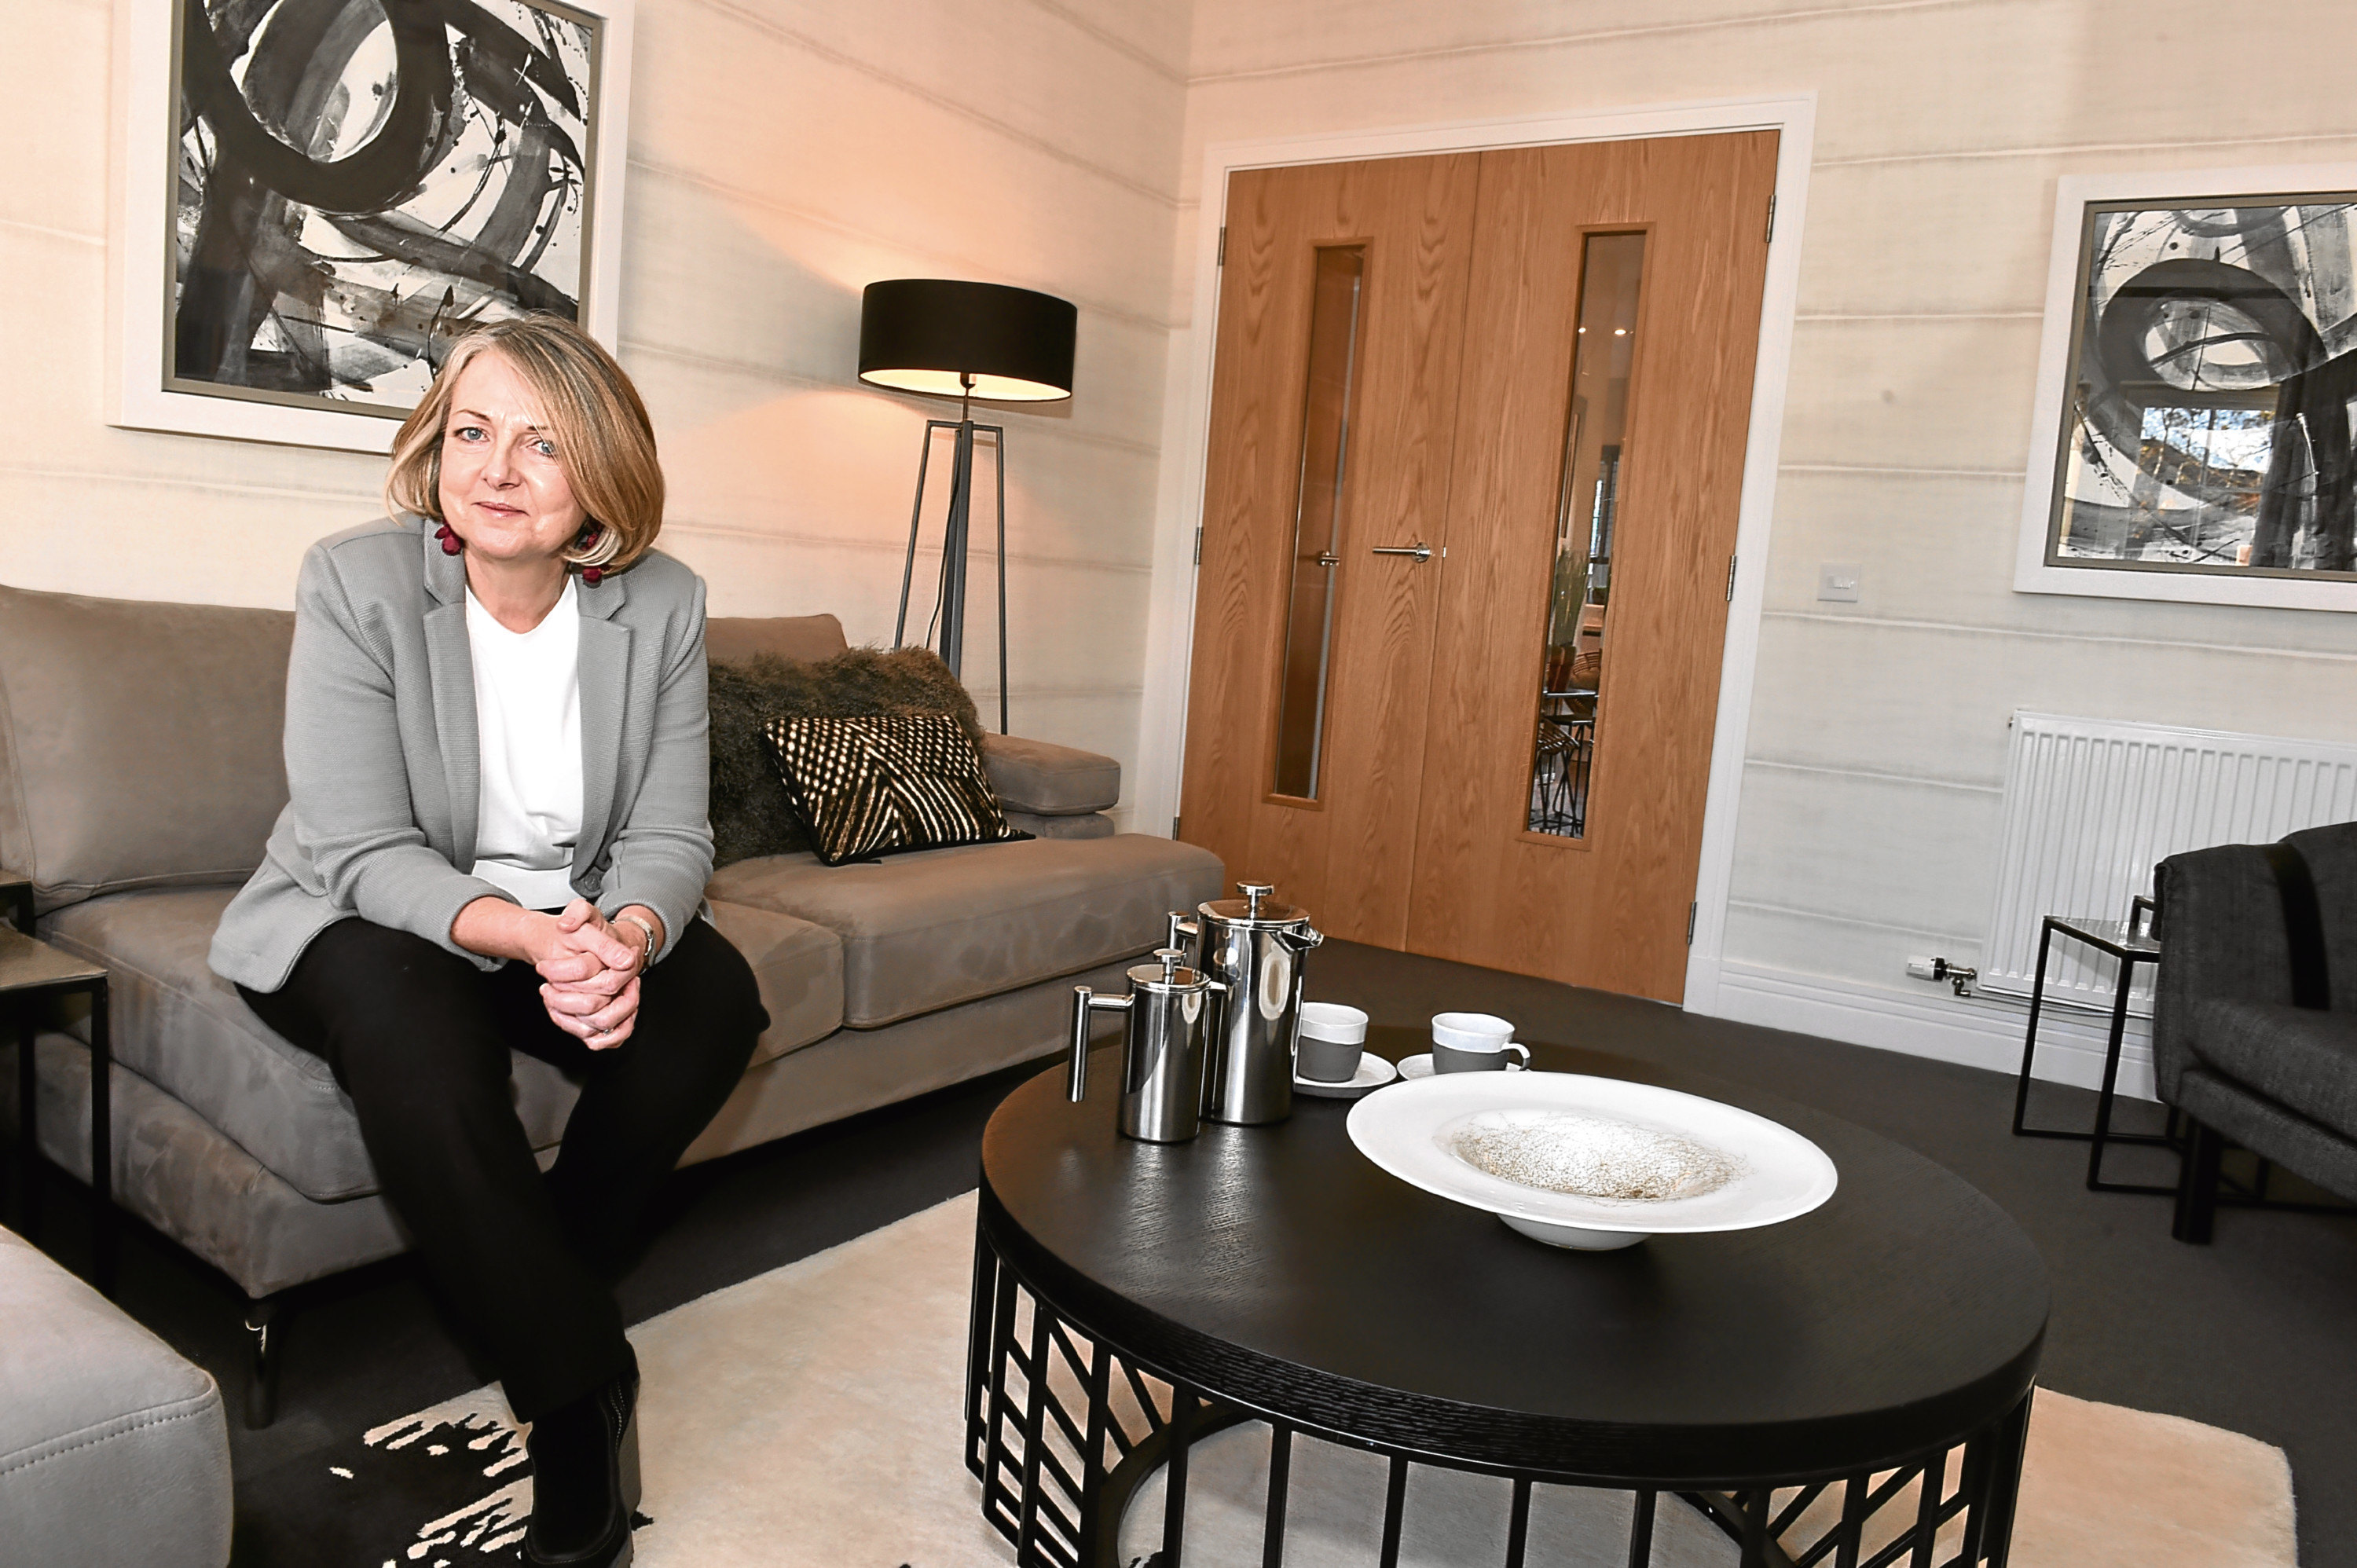 CALA have launched a new show home at Grandhome, off Whitestripes Avenue, Bridge of Don, Aberdeen. Pictured is interior designer Eileen Kesson.
Picture by COLIN RENNIE  November 16, 2017.